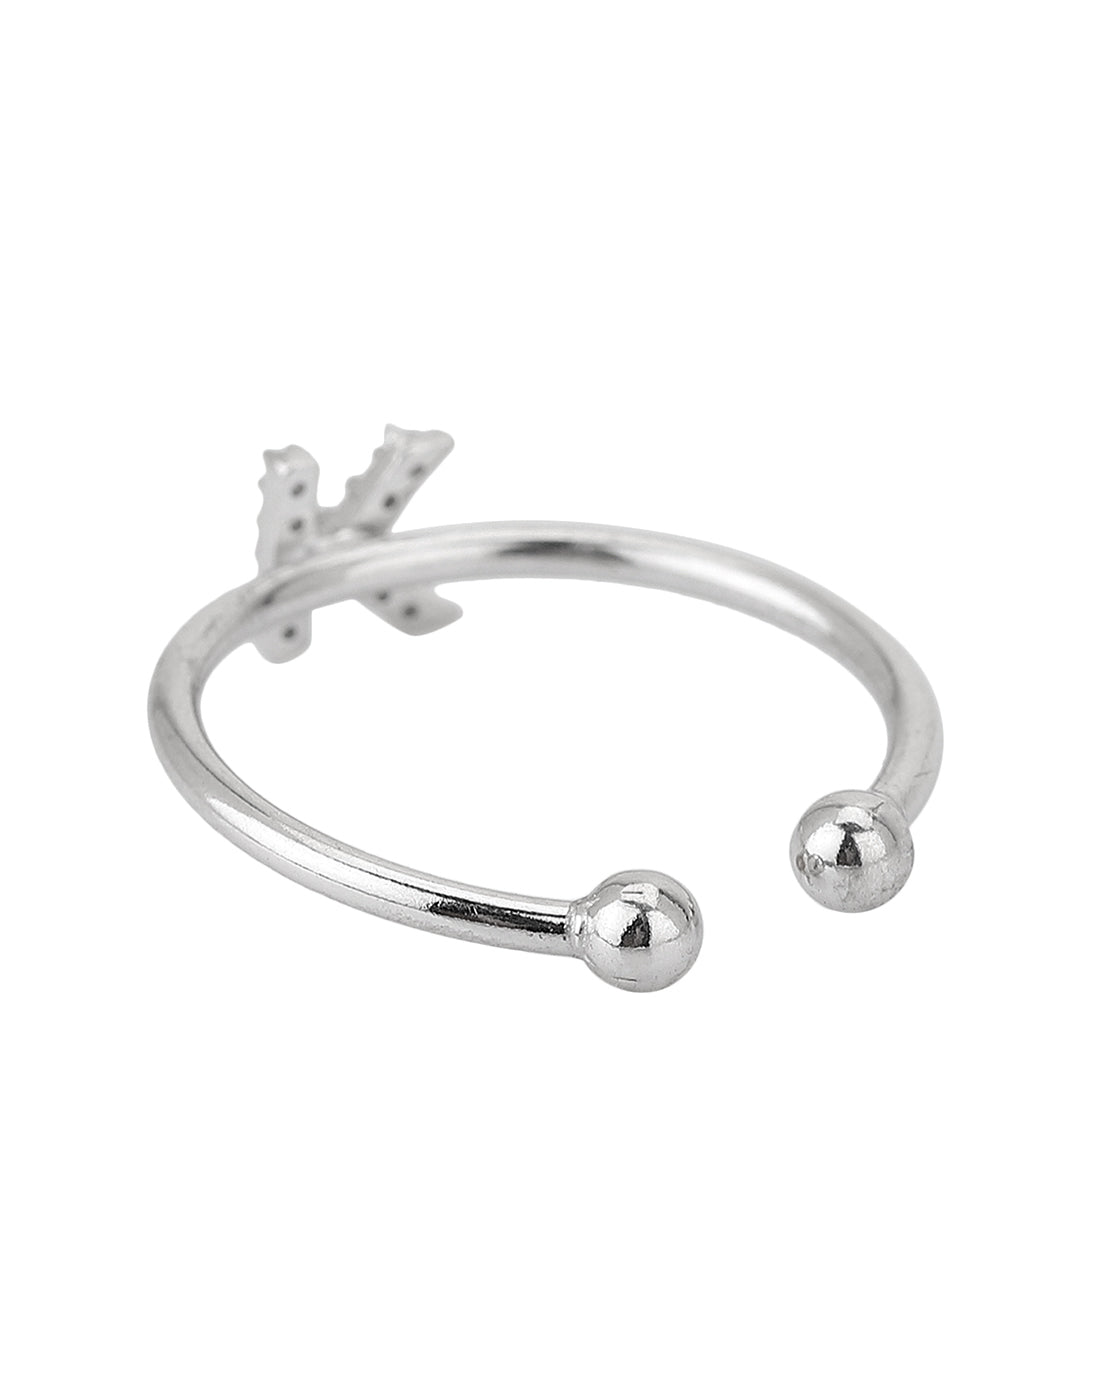 Carlton London Rhodium Plated Silver Toned &quot;K&quot; Shape Cz Studded Adjustable Finger Ring For Women